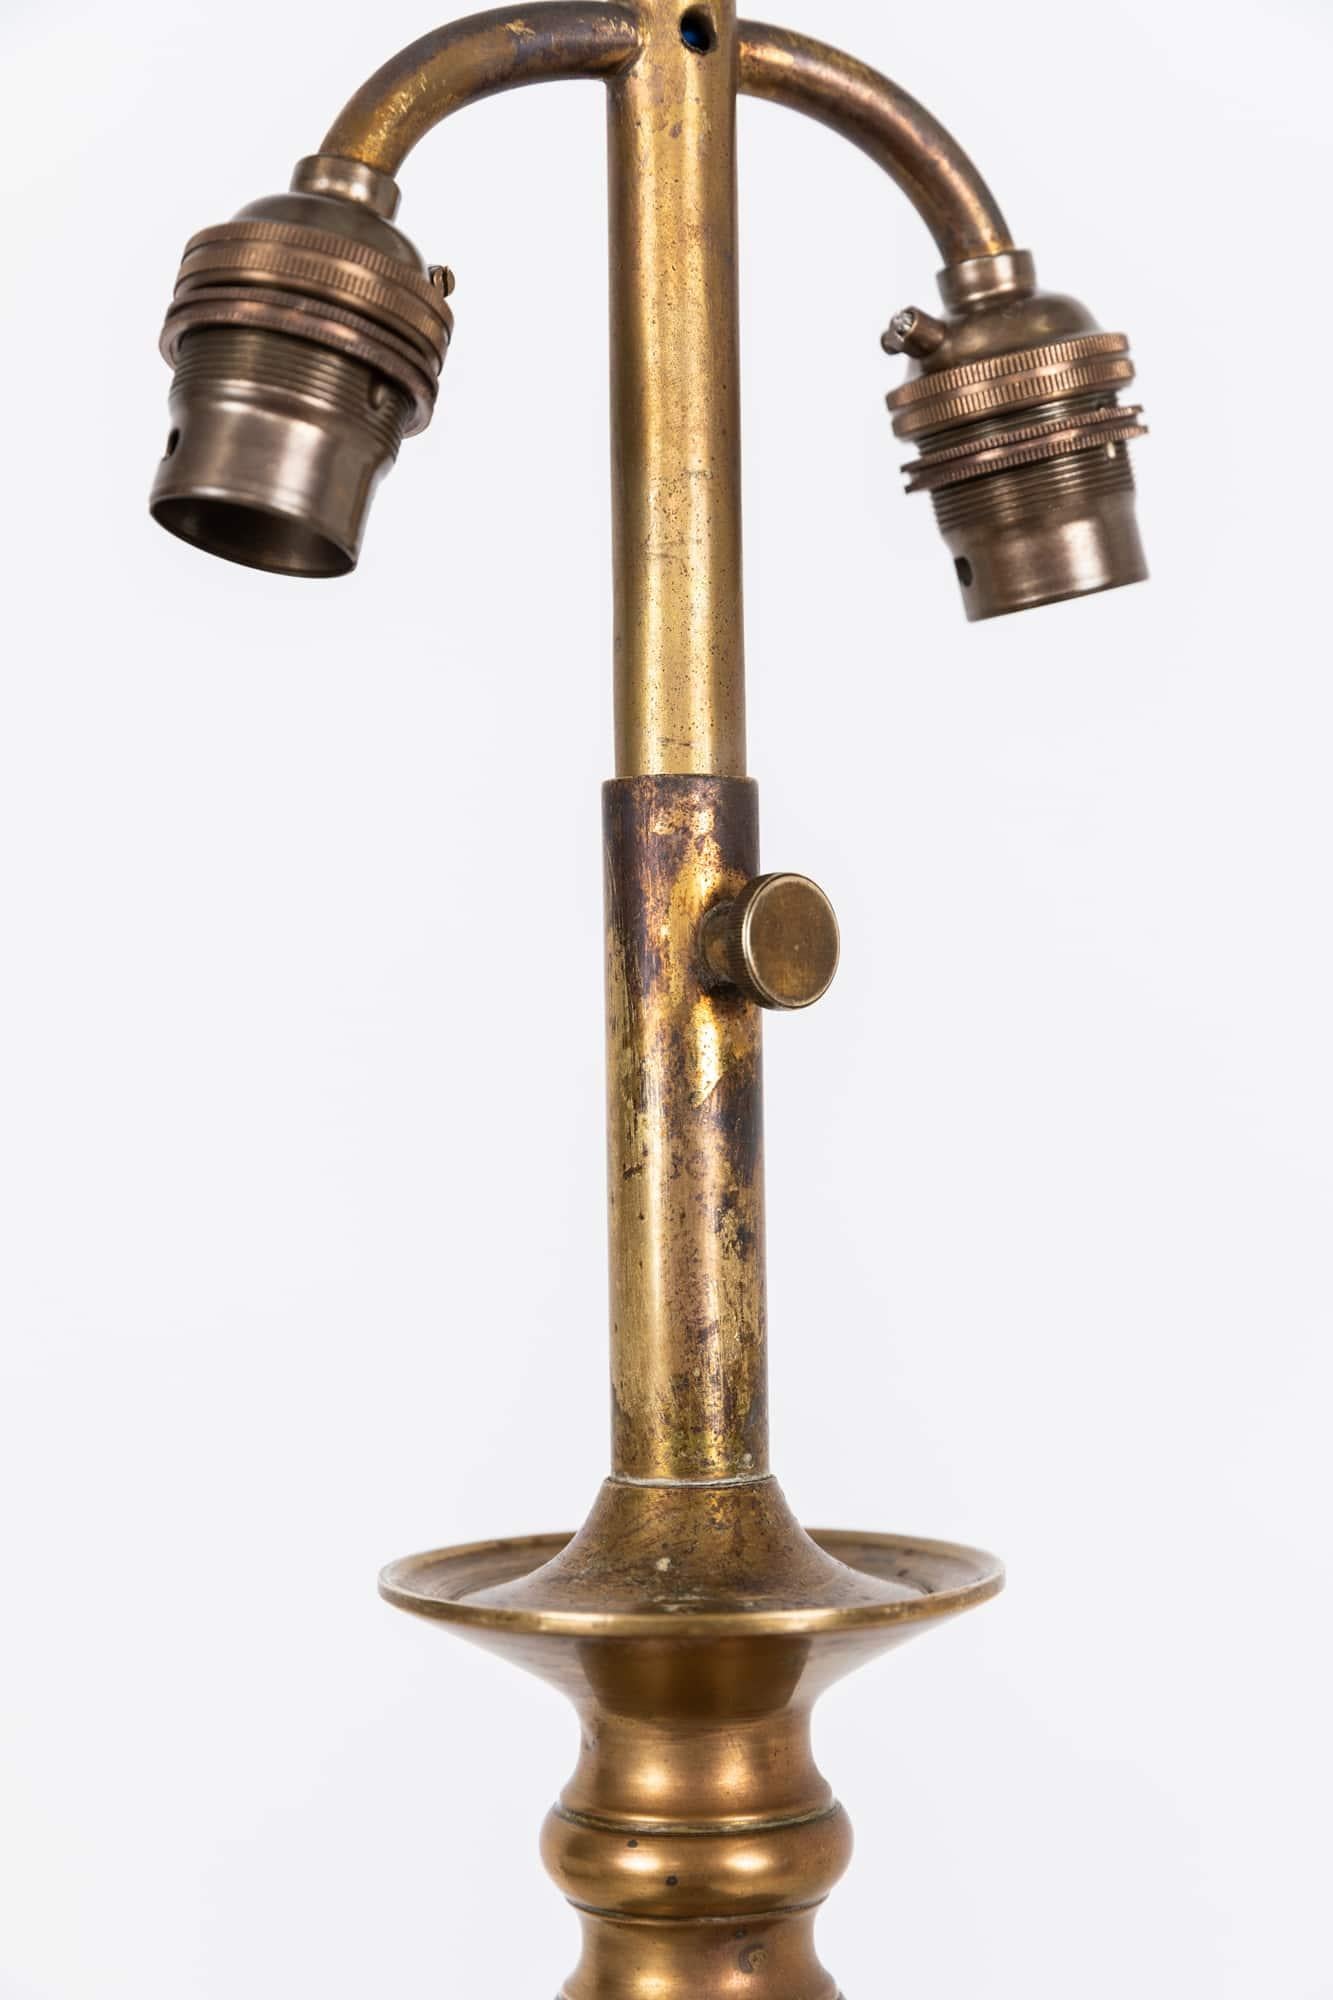 English Large Antique Vintage Industrial Brass Turned Column Desk Table Lamp, circa 1900 For Sale